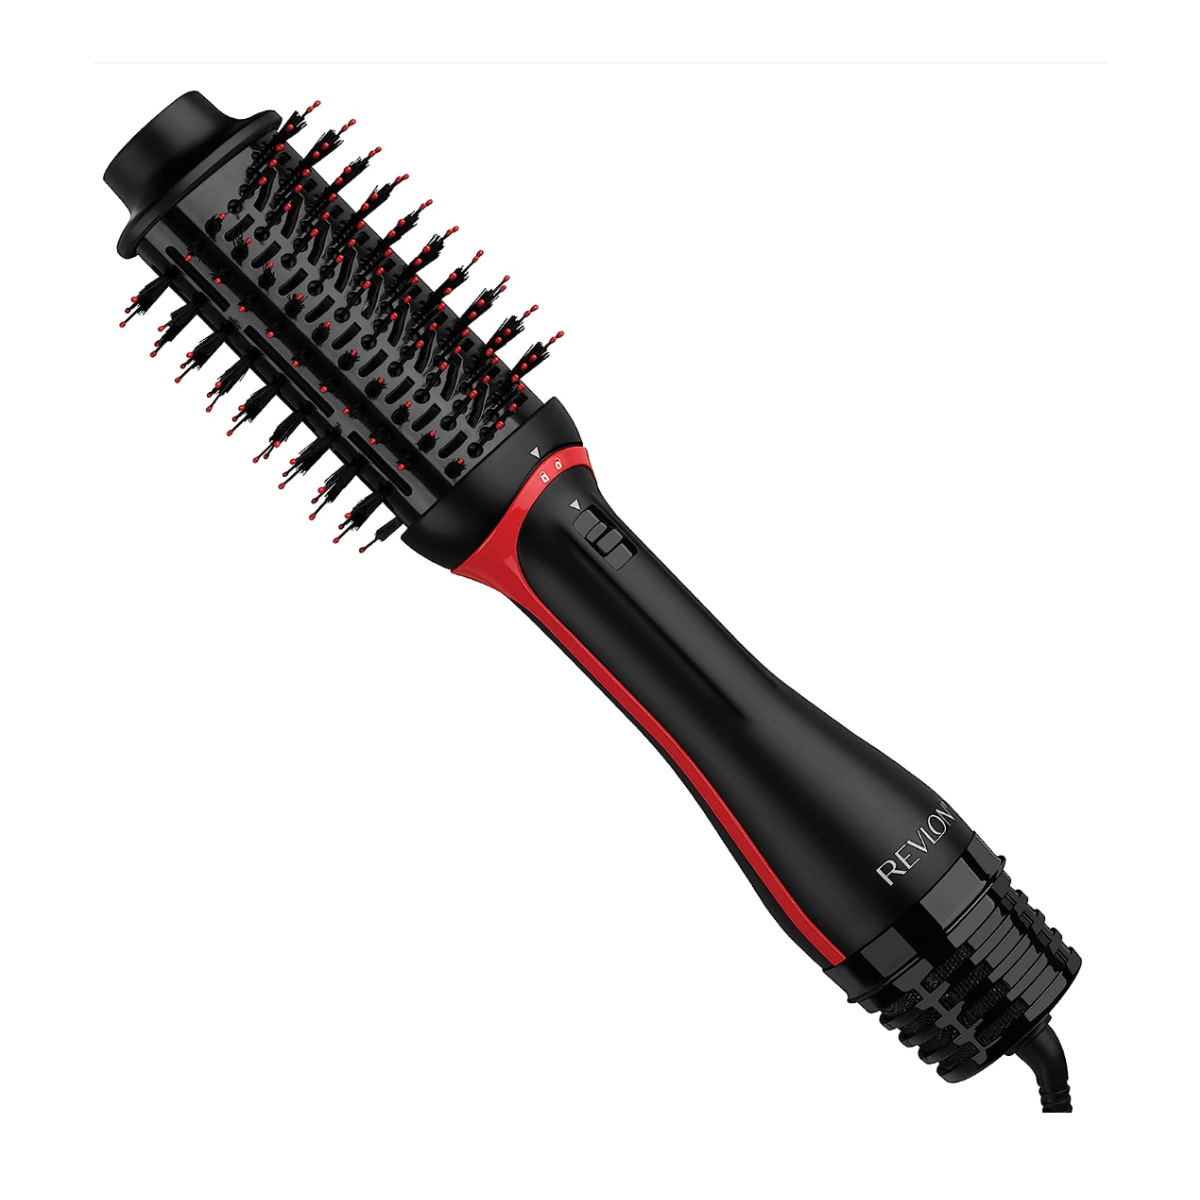 <p>Guess what? Everyone’s favorite dryer brush may not be as small as some travel hair dryers, but its long, skinny design makes it just as easy to pack. We’ve <a href="https://www.glamour.com/story/revlon-one-step-blow-dryer-brush-review?mbid=synd_msn_rss&utm_source=msn&utm_medium=syndication">written about the wildly popular pick before</a>—our editors love it, our readers love it, almost everyone on TikTok loves it. (Is there anyone who doesn’t love it? Inconceivable.) And that’s likely because the brush and dryer combo is beyond powerful and gets super hot to smooth out strands, stat.</p> <ul> <li><strong>Pros:</strong> Works super fast, easy to pack, budget-friendly</li> <li><strong>Cons:</strong> Some users say it gets <em>too hot</em>, not dual-voltage</li> <li><strong>Weight:</strong> 1.63 pounds</li> <li><strong>Dual Voltage:</strong> No</li> </ul> $70, Amazon. <a href="https://www.amazon.com/REVLON-One-Step-Dryer-Volumizer-Brush/dp/B096SVJZSW">Get it now!</a><p>Sign up for today’s biggest stories, from pop culture to politics.</p><a href="https://www.glamour.com/newsletter/news?sourceCode=msnsend">Sign Up</a>